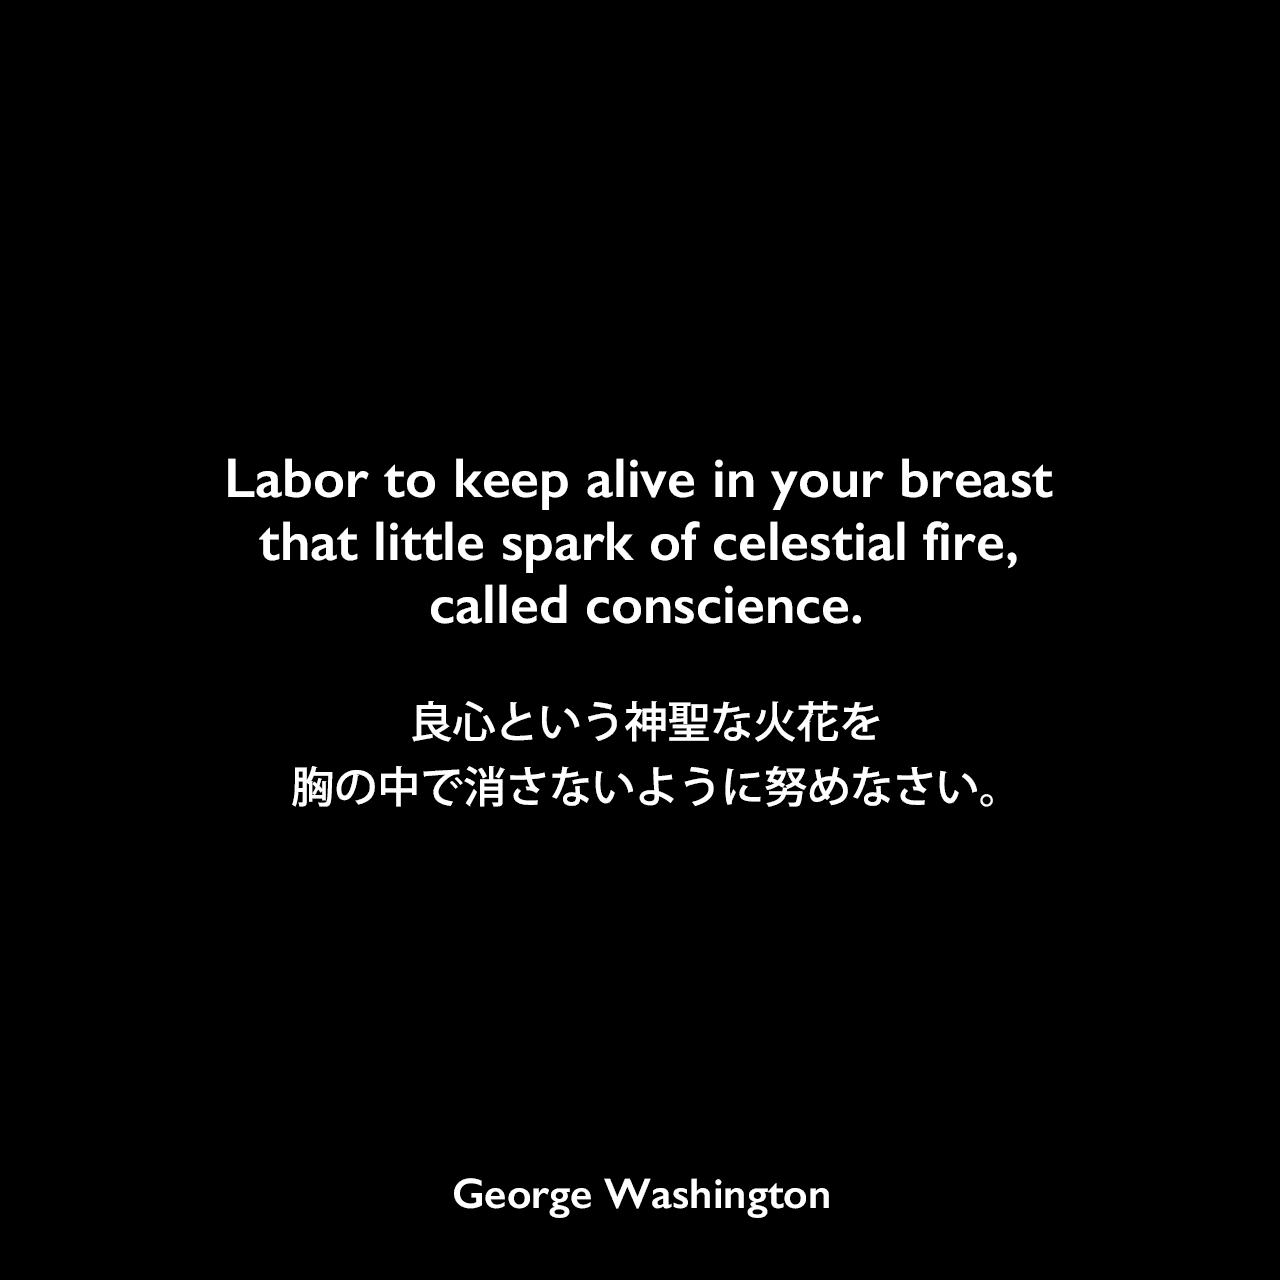 Labor to keep alive in your breast that little spark of celestial fire, called conscience.良心という神聖な火花を、胸の中で消さないように努めなさい。George Washington